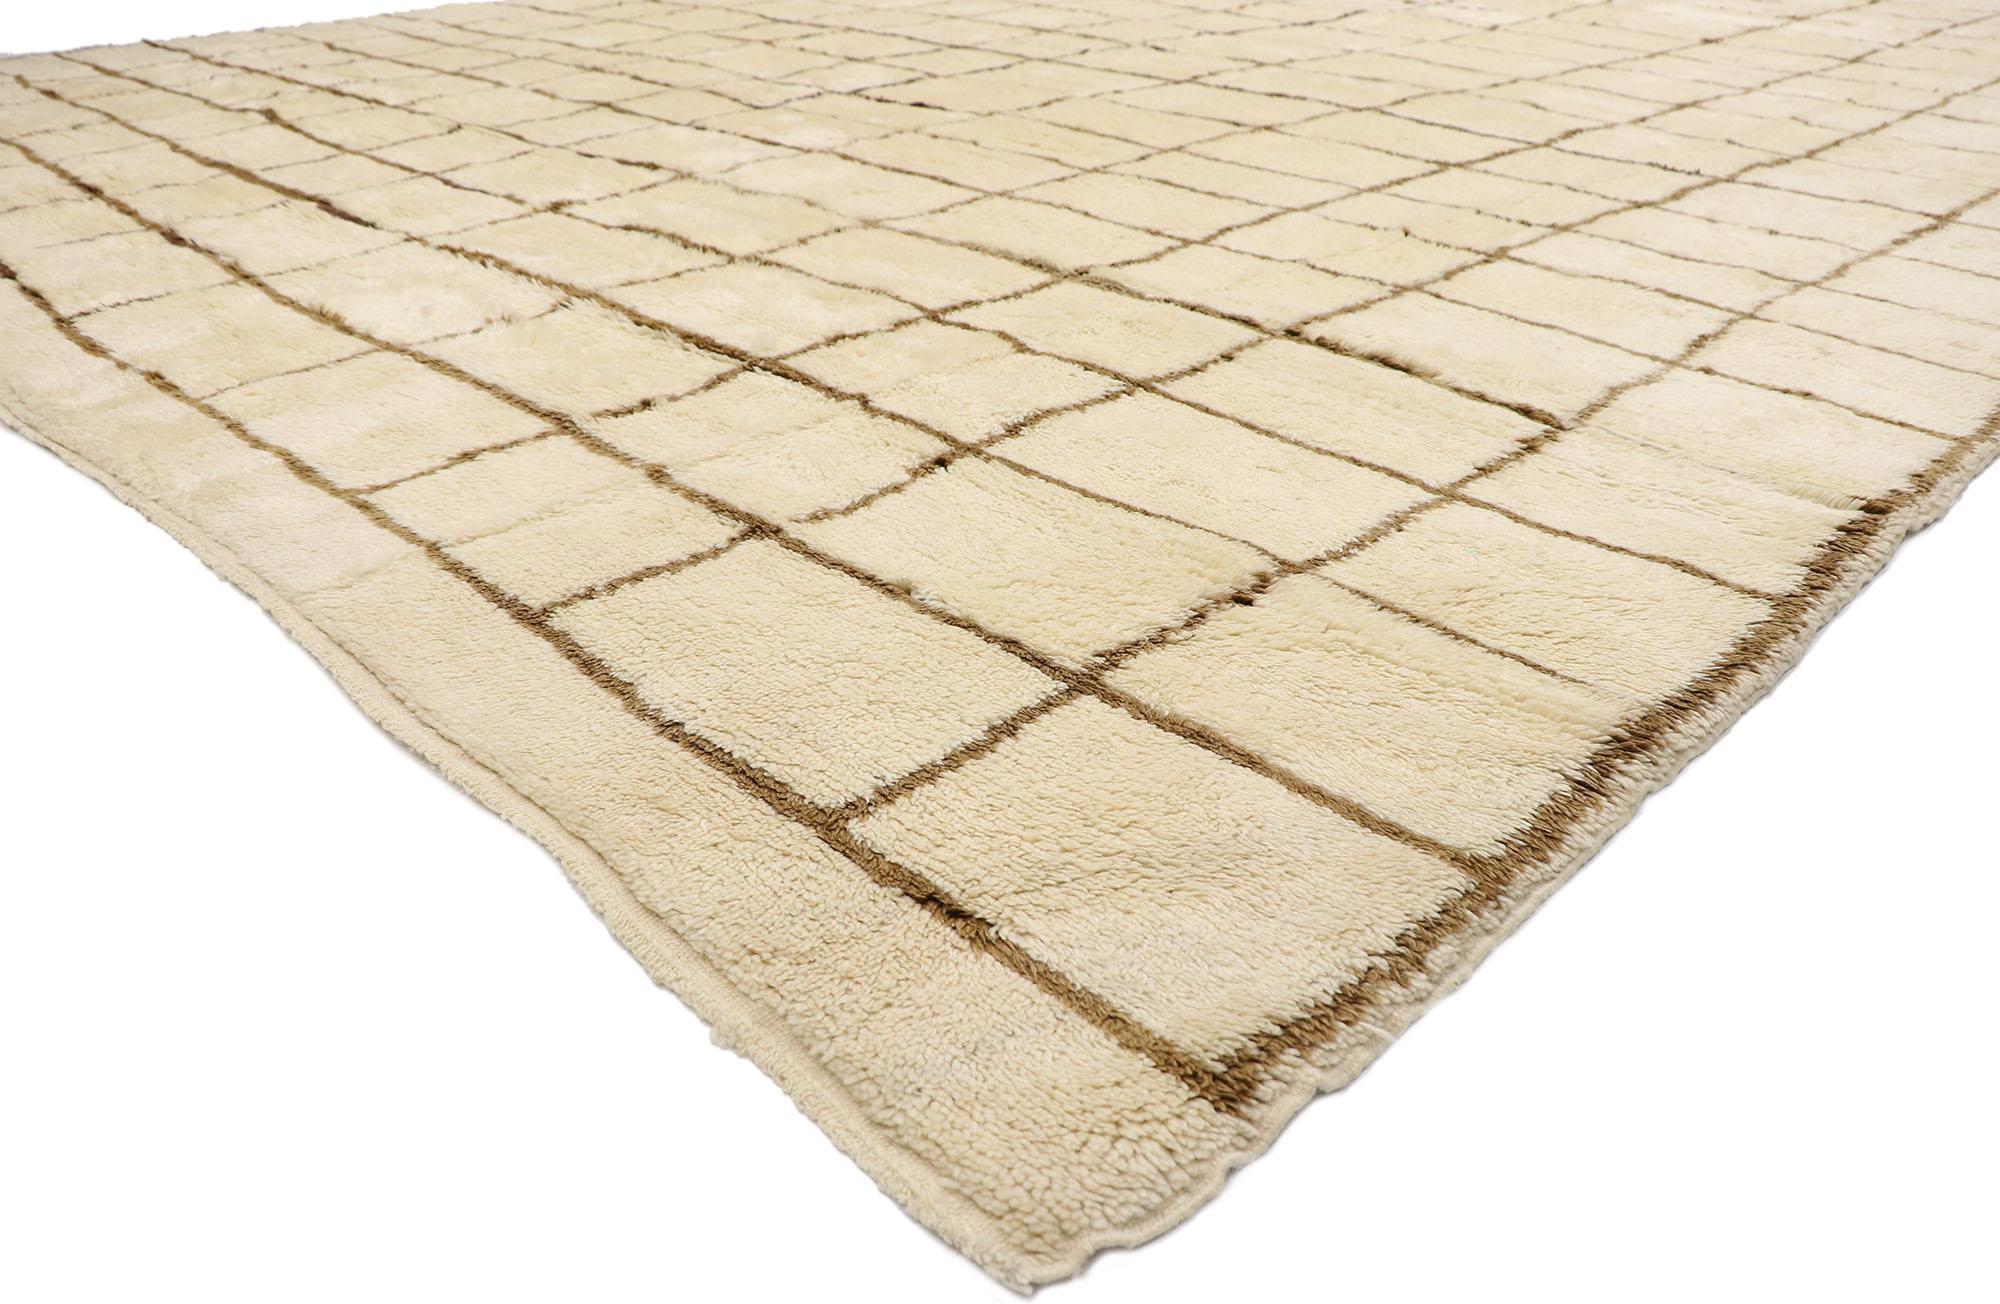 21143 Oversized Neutral Berber Moroccan Rug, 13'07 x 17'11.
Reflecting elements of Shibui with incredible detail and texture, this hand knotted wool Berber Moroccan rug is simple and subtle. The checked silhouette and neutral colors woven into this